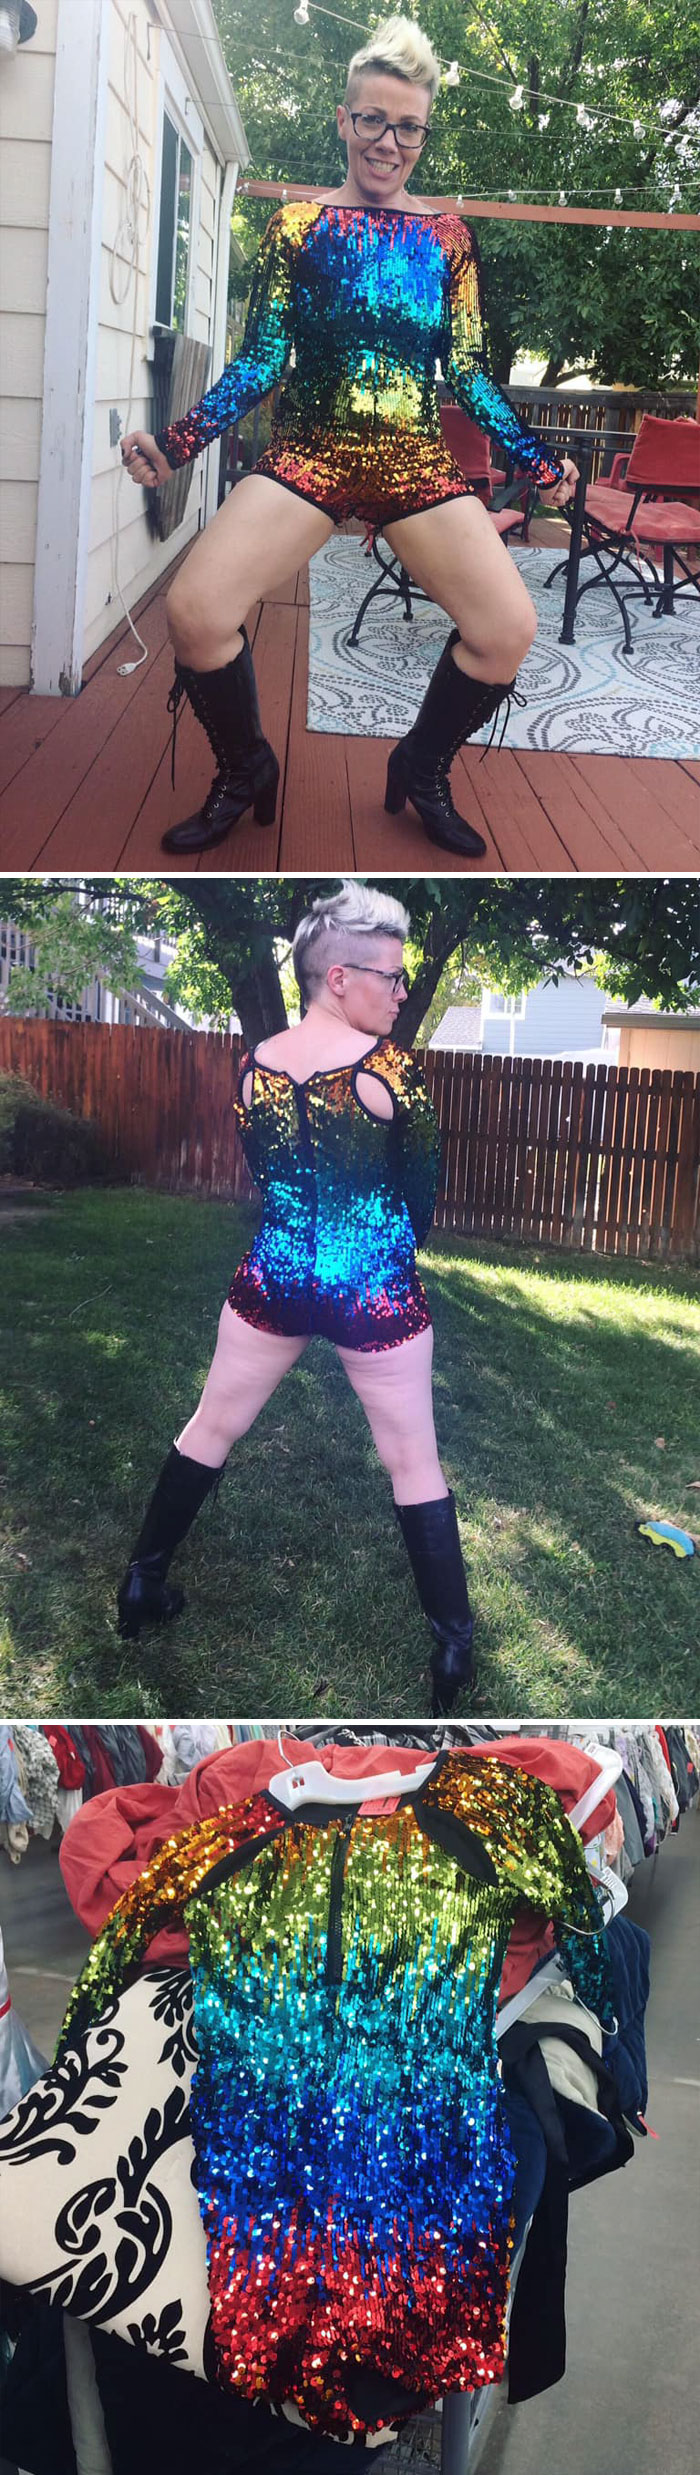 I Found The Thrift Store Holy Grail. Am I Ready For Pride Or What? $7.99 For The Rainbow-Sequined Bodysuit And Worth Every Cent